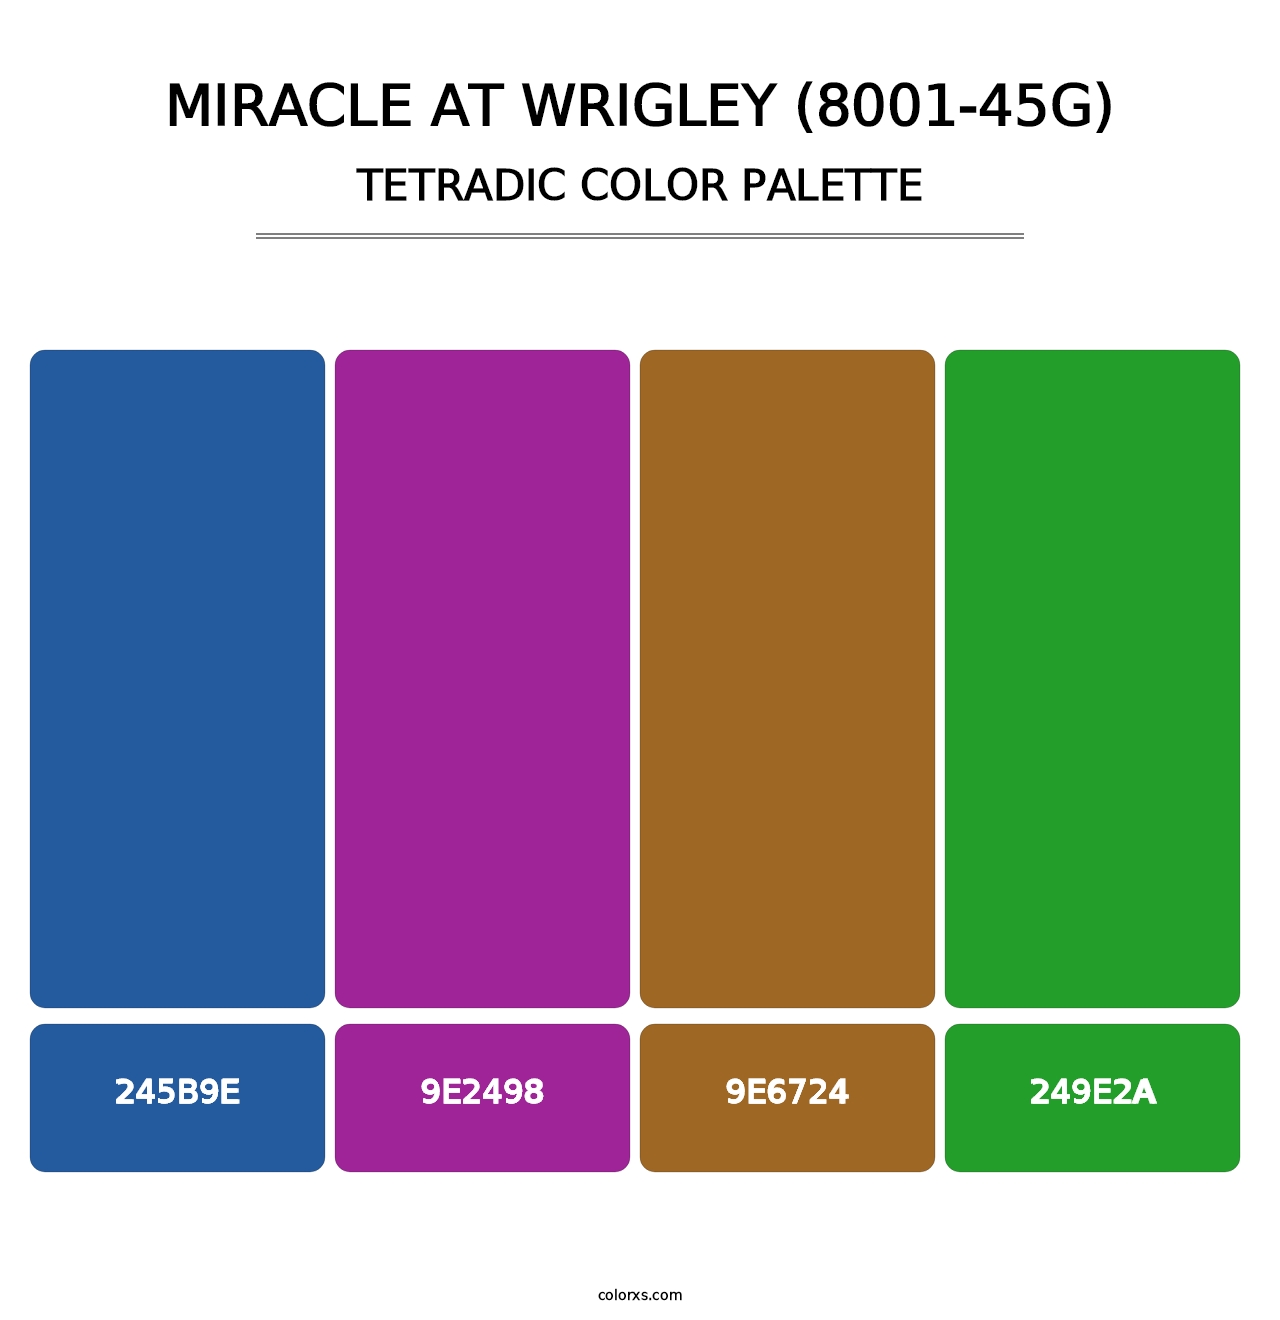 Miracle at Wrigley (8001-45G) - Tetradic Color Palette